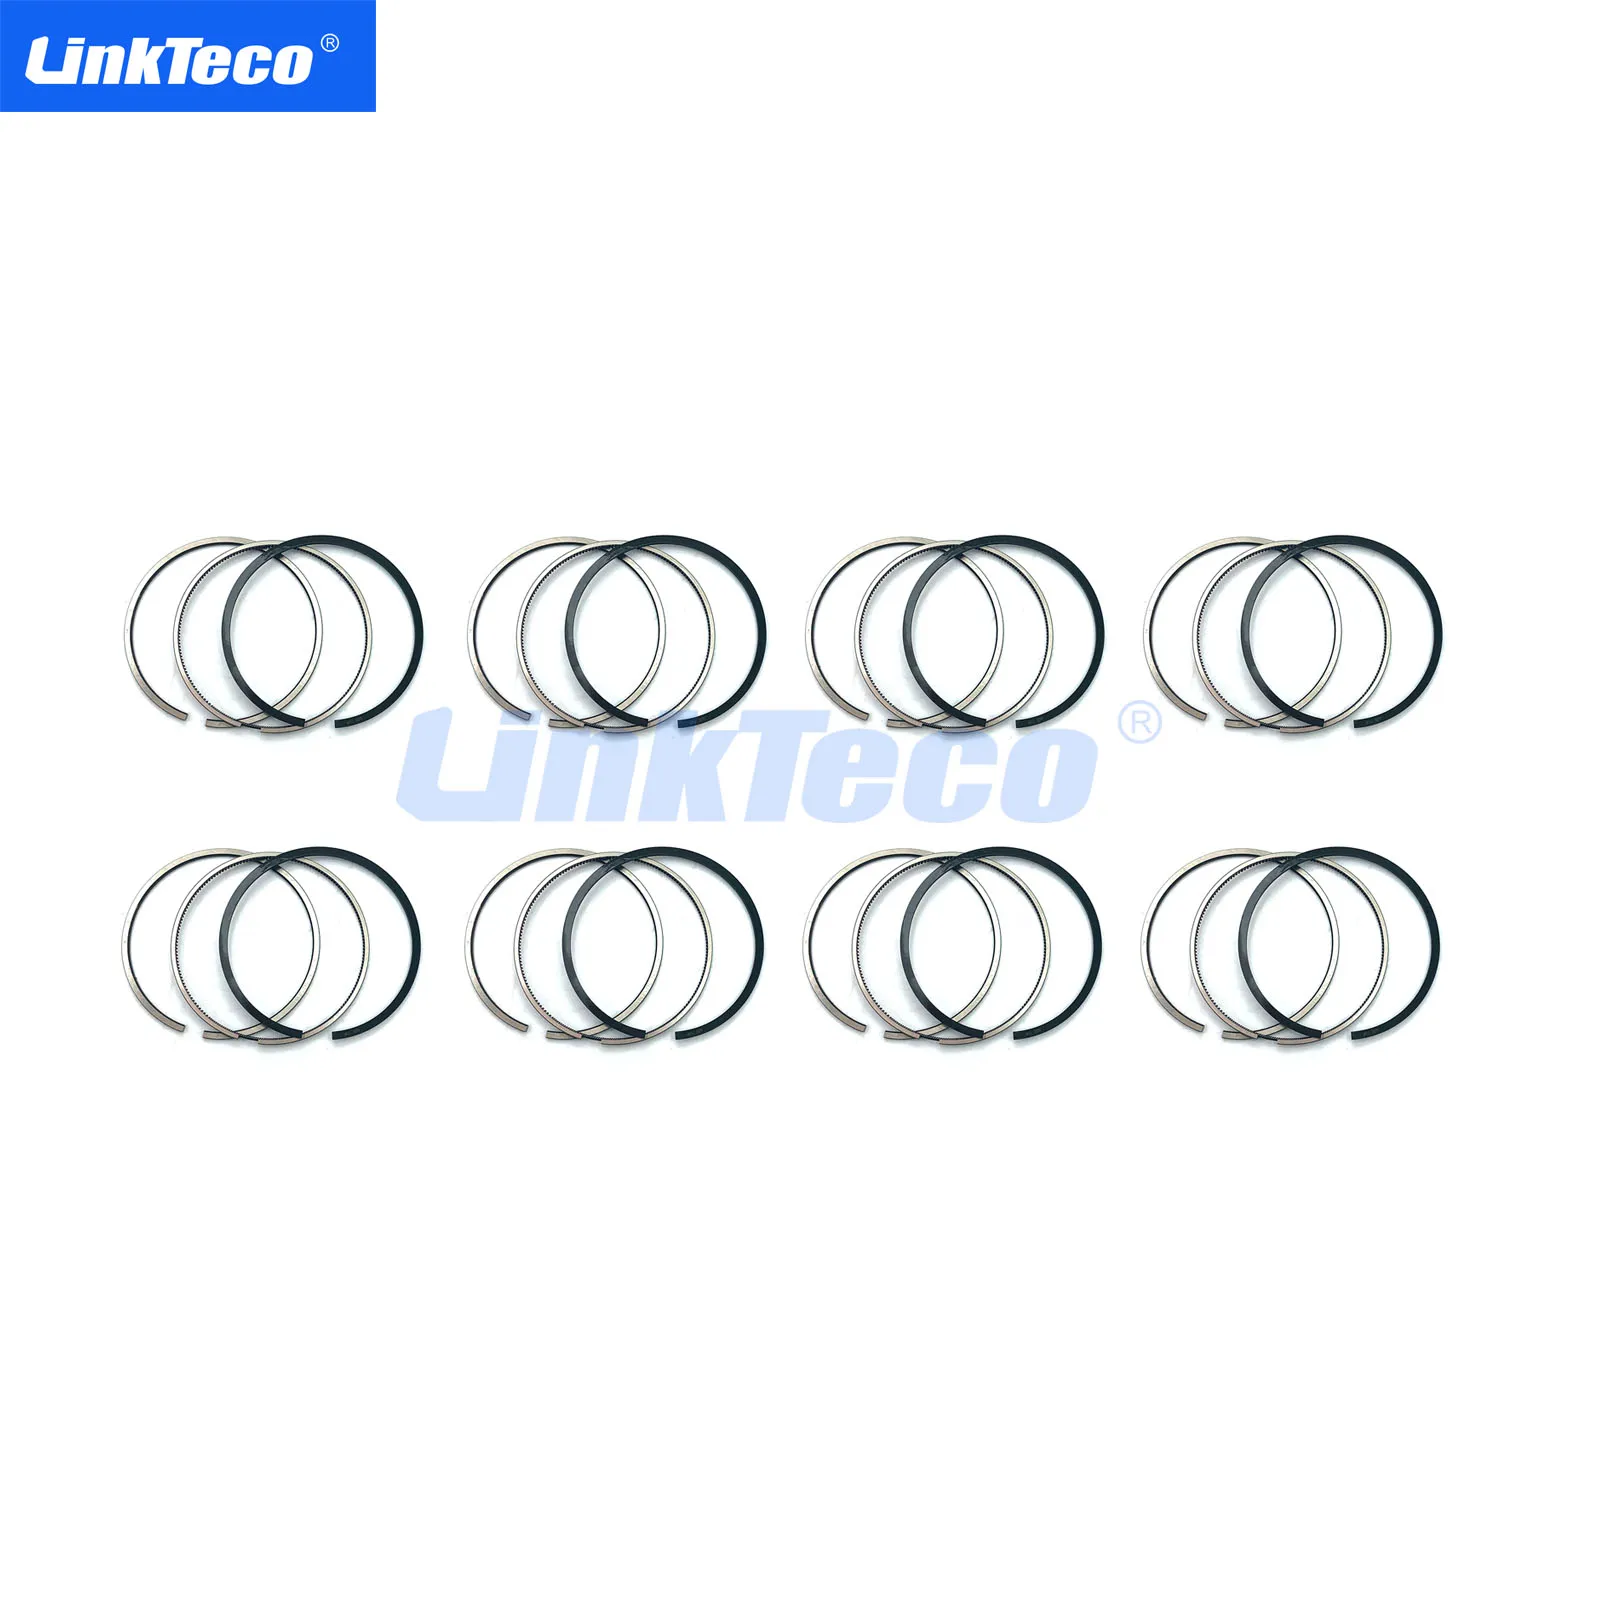 

8PCS Auto Engine Parts Piston Ring For Land rover 3.6T 368DT Diesel OE LR010297